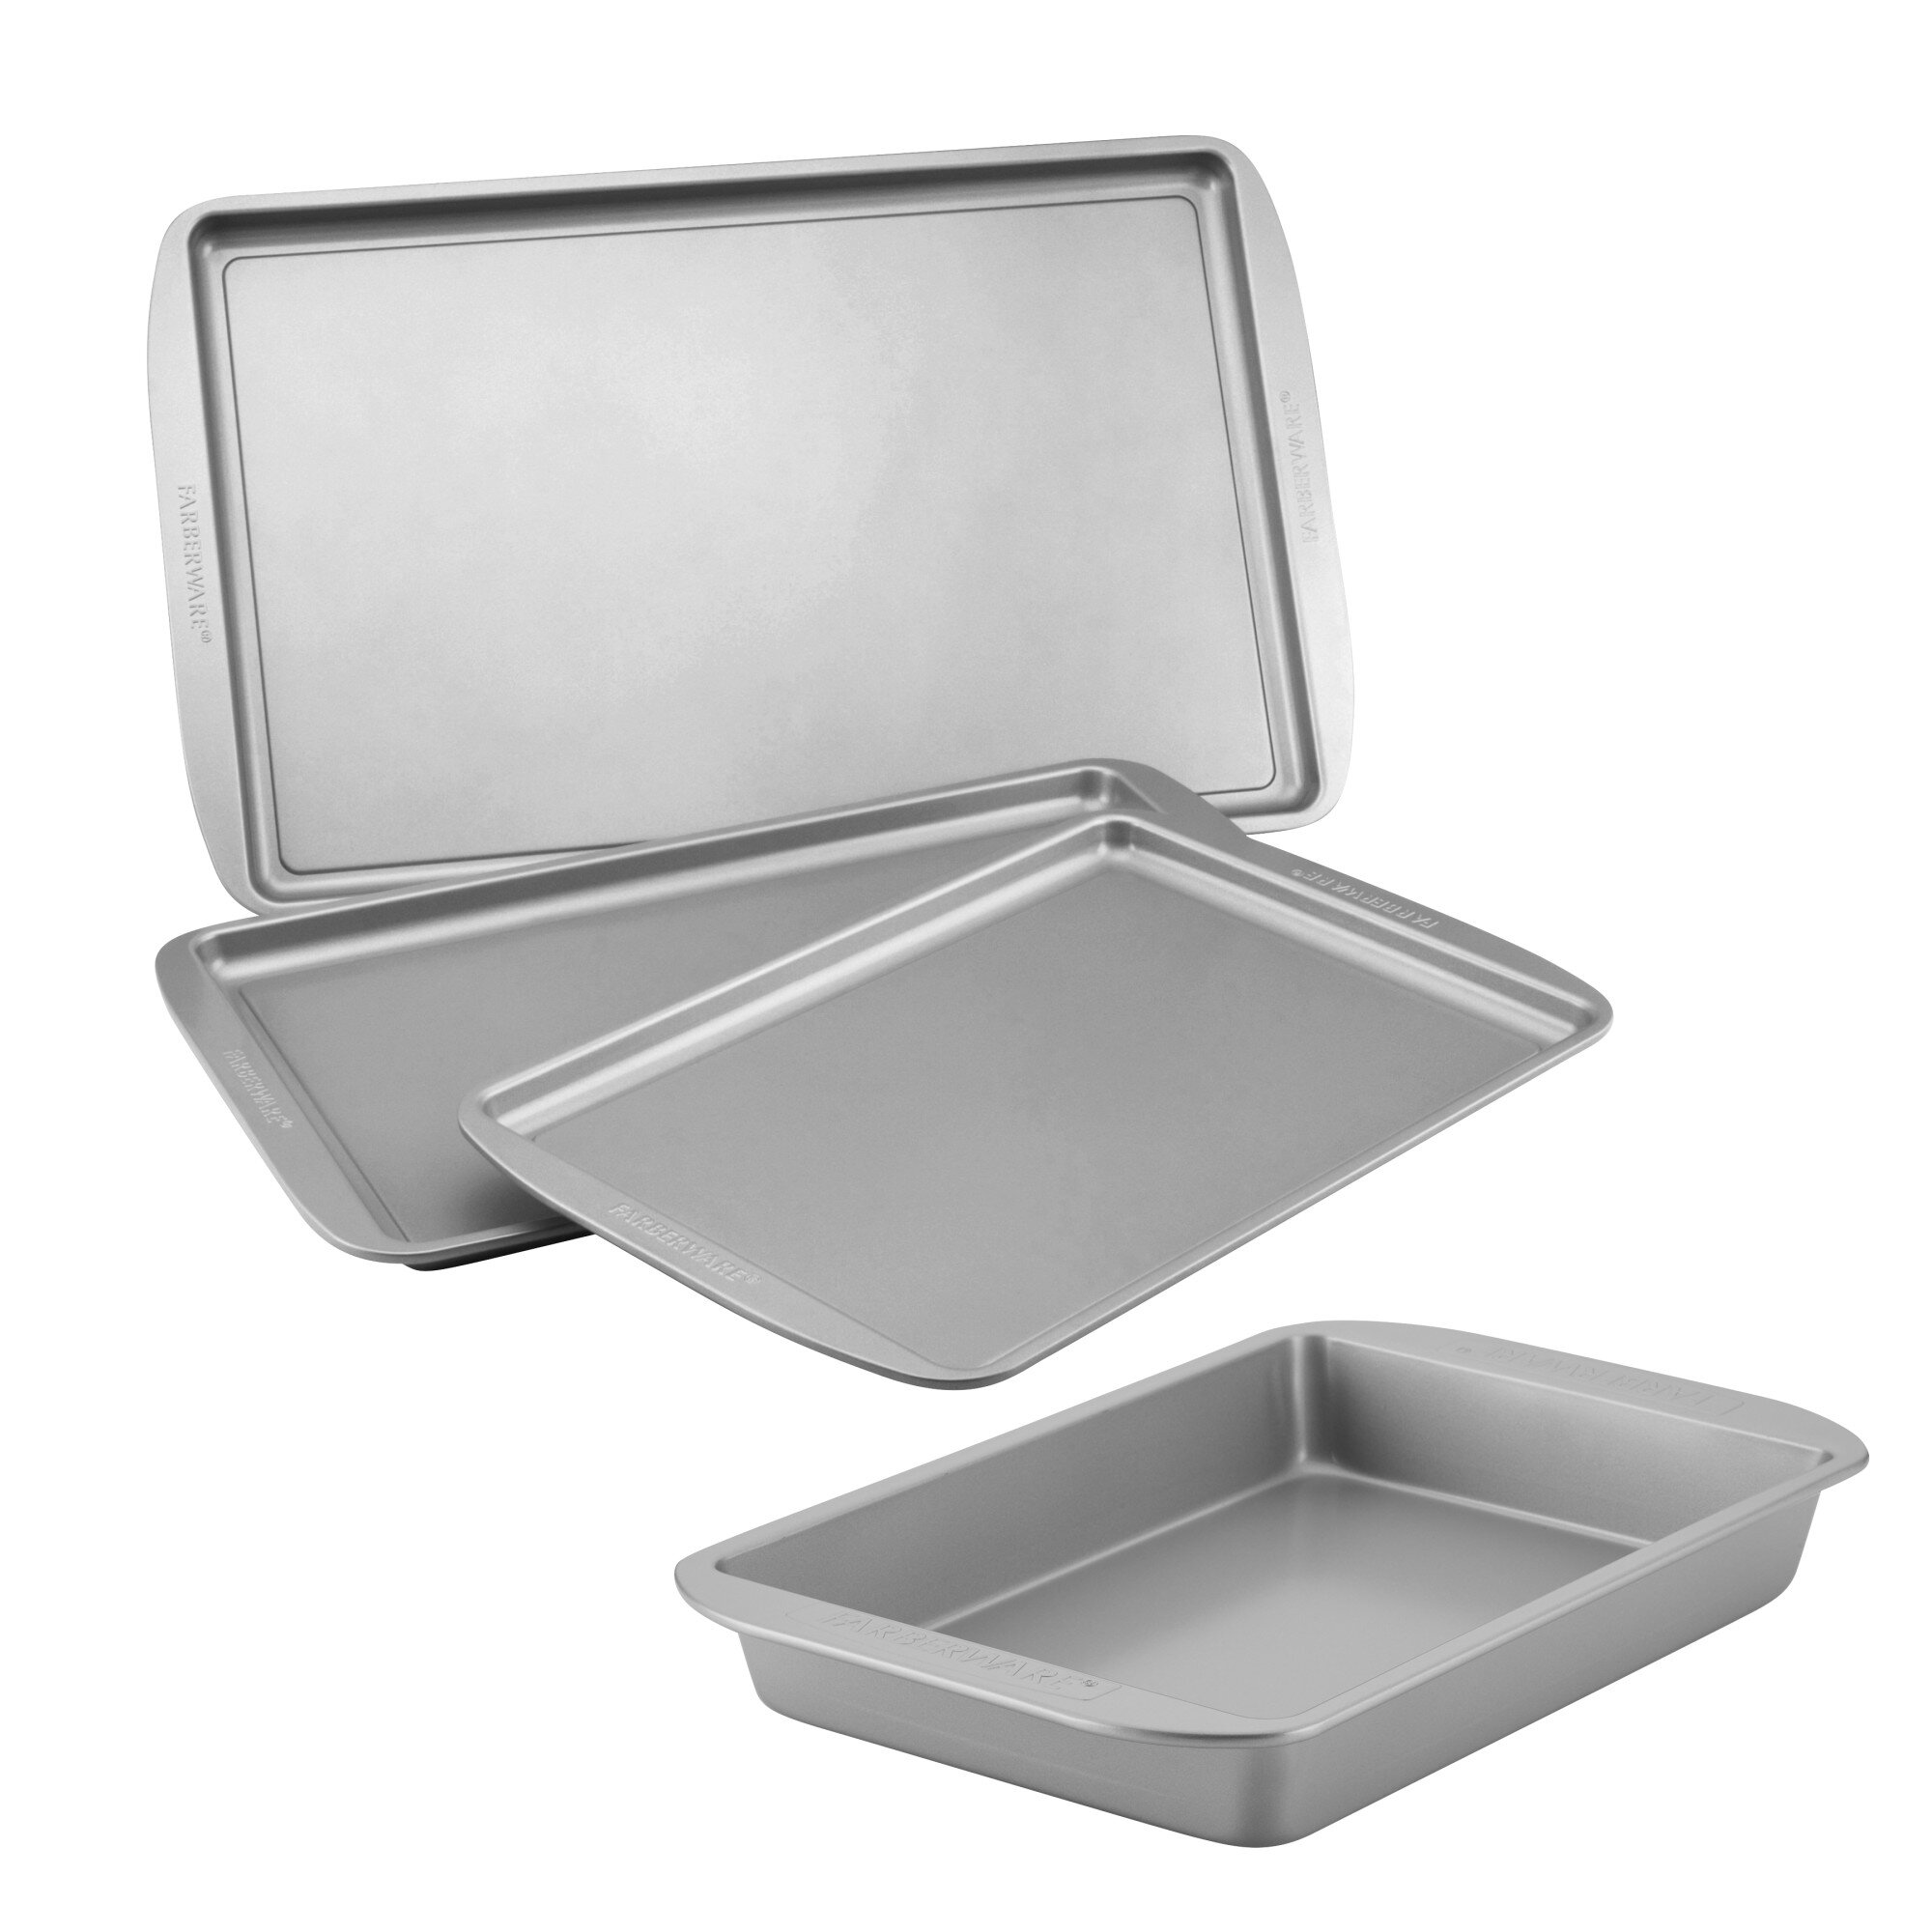 Joytable Nonstick Bakeware Set - 15 PC Baking Tray Set with Silicone Handles & Utensils - Oven Safe & Carbon Steel Cookie Sheets, Baking Pans, Cake